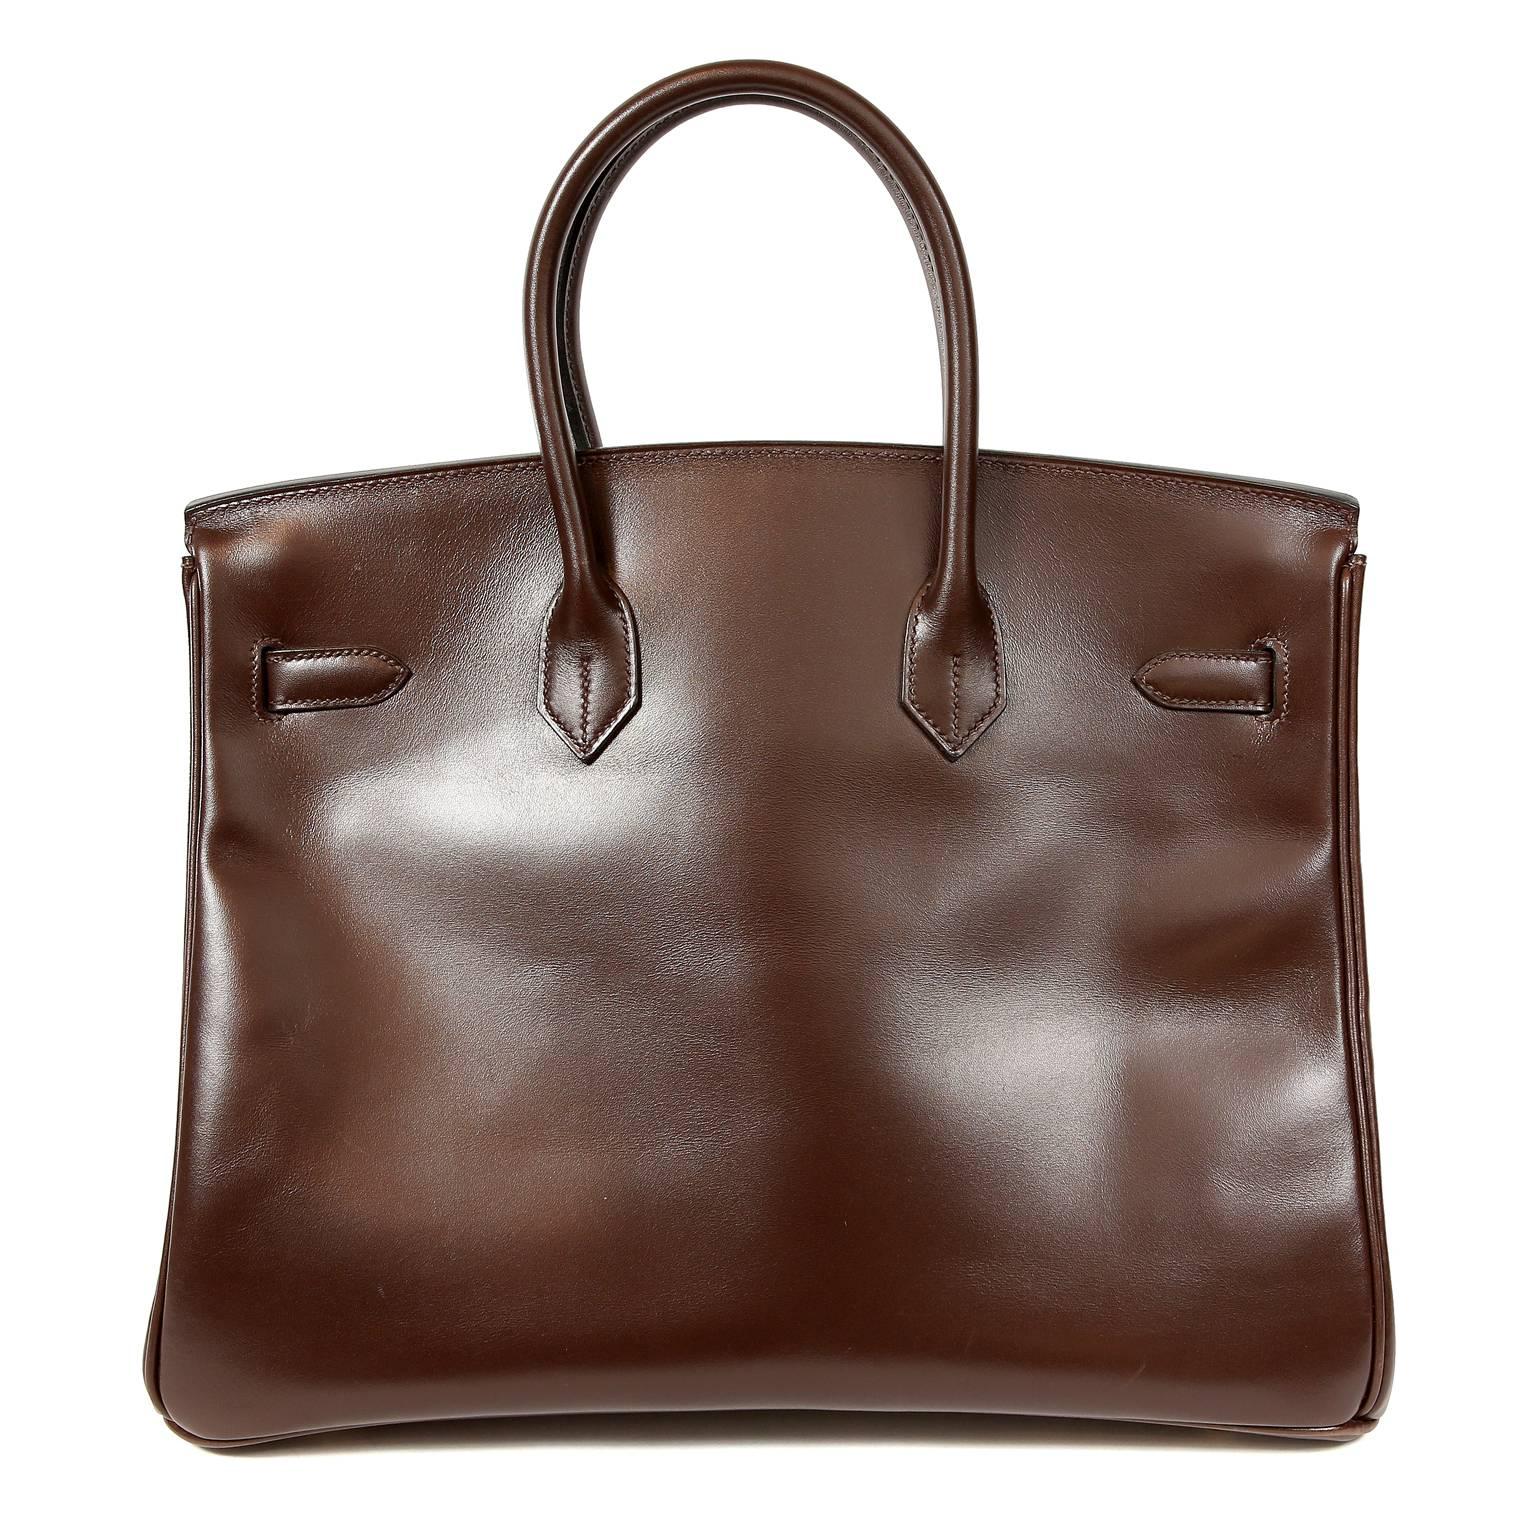 Hermès Chocolate Box Calf 35 cm Birkin- EXCELLENT
Hermès bags are considered the ultimate luxury item the world over.  Hand stitched by skilled craftsmen, wait lists of a year or more are commonplace. 
Box Calf is one of the original Hermès